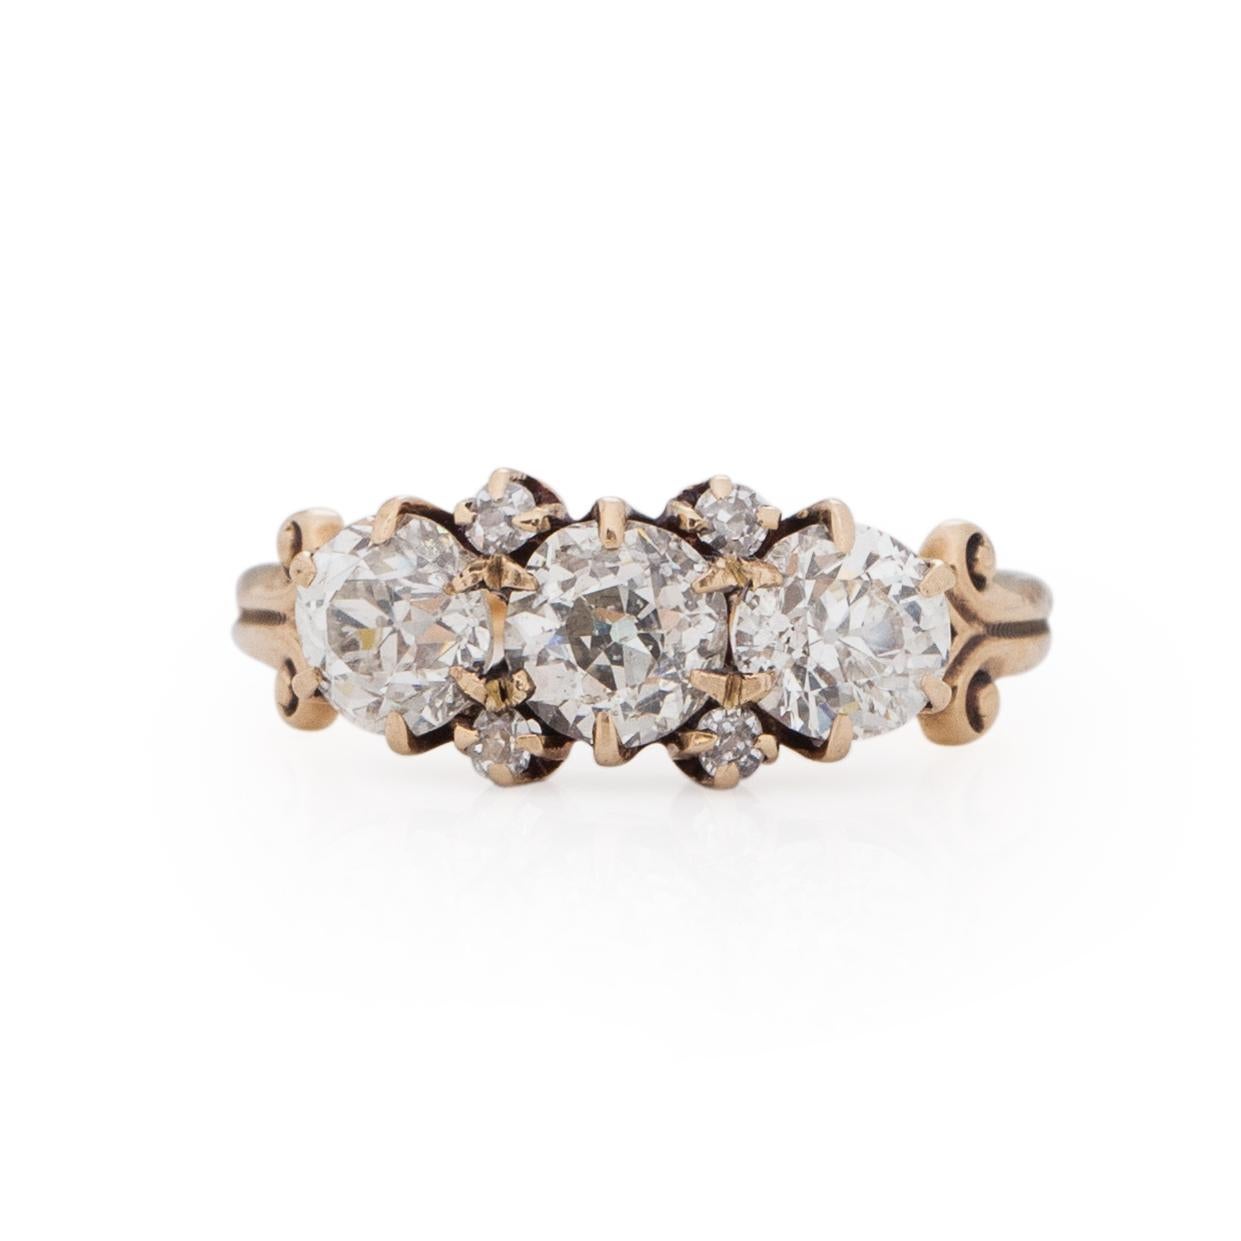 This Victorian beauty is a big look with classic Victorian era details. Crafted in 10K yellow gold with a slight rosey hue. The tapered shanks have a subtle, scroll or column top design that holds a classic prong setting. In those prong settings